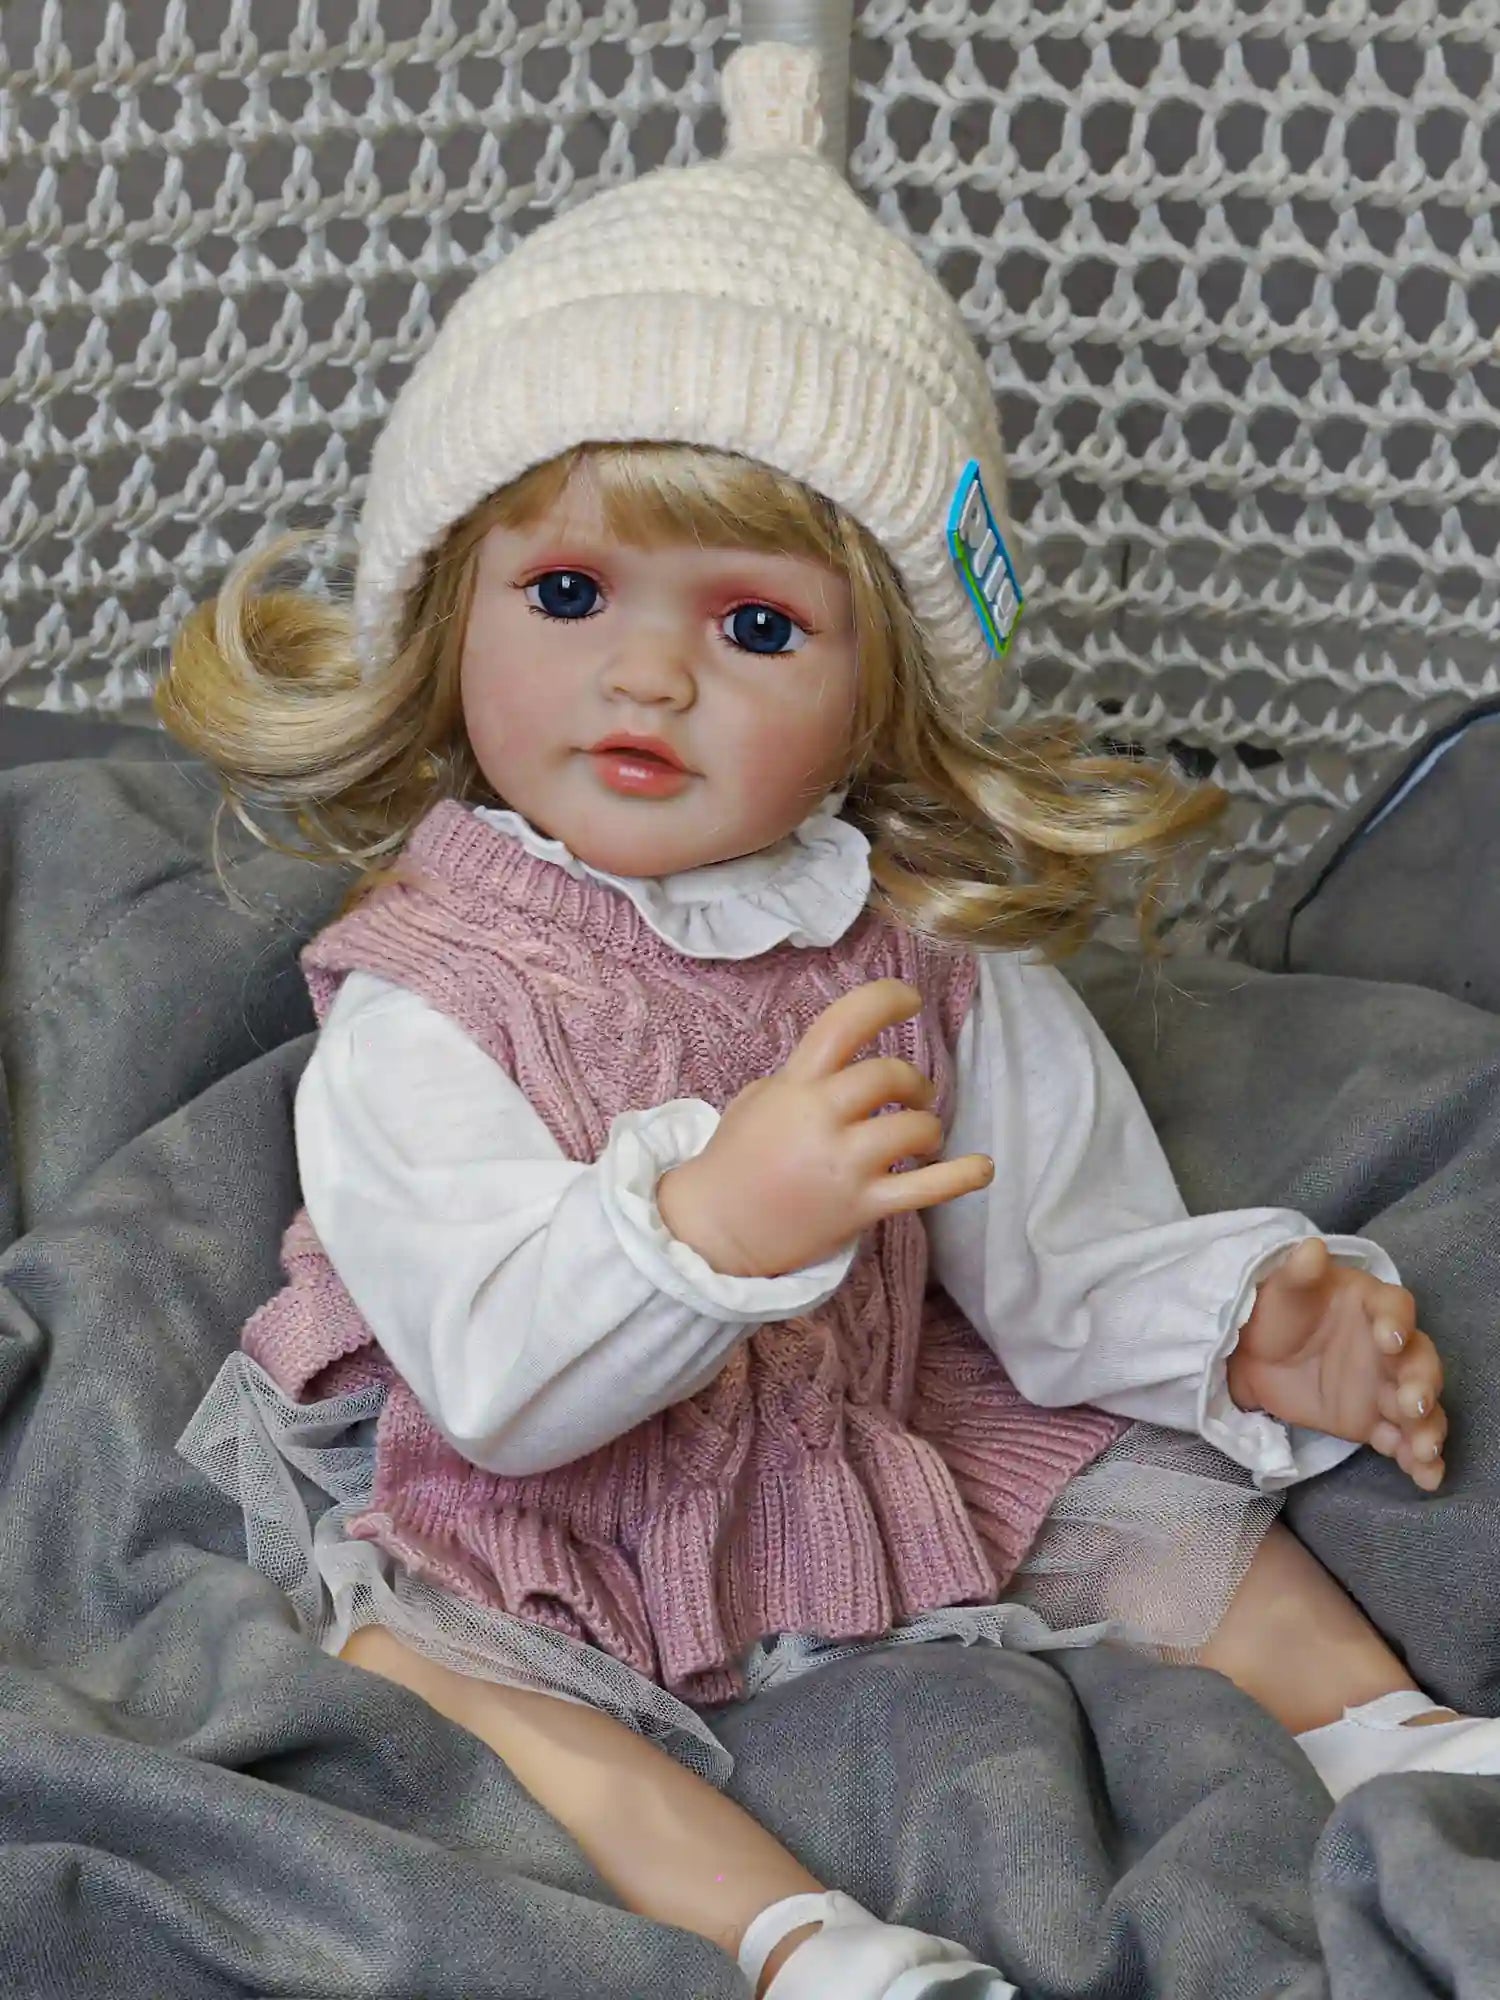 Experience the joy of parenthood with this exquisitely detailed reborn doll, featuring hand-painted features and silky golden locks.